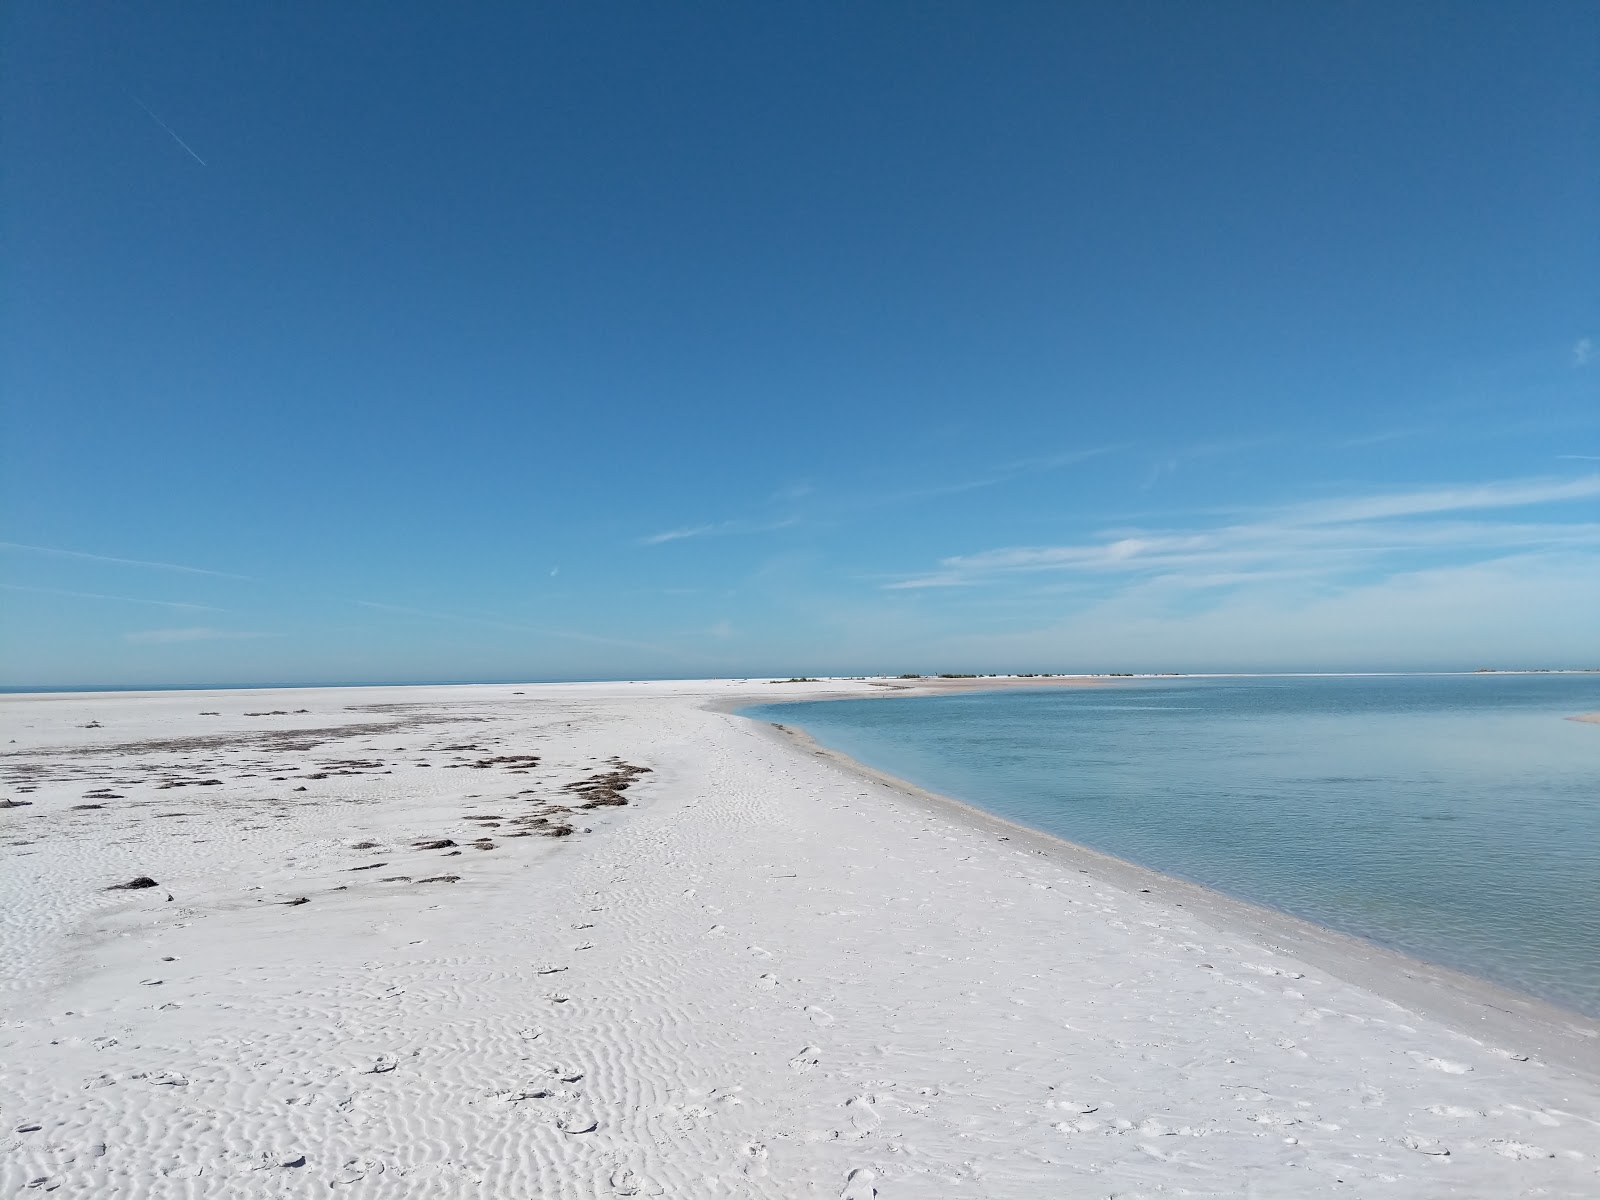 Photo of Fort desoto beach with long straight shore